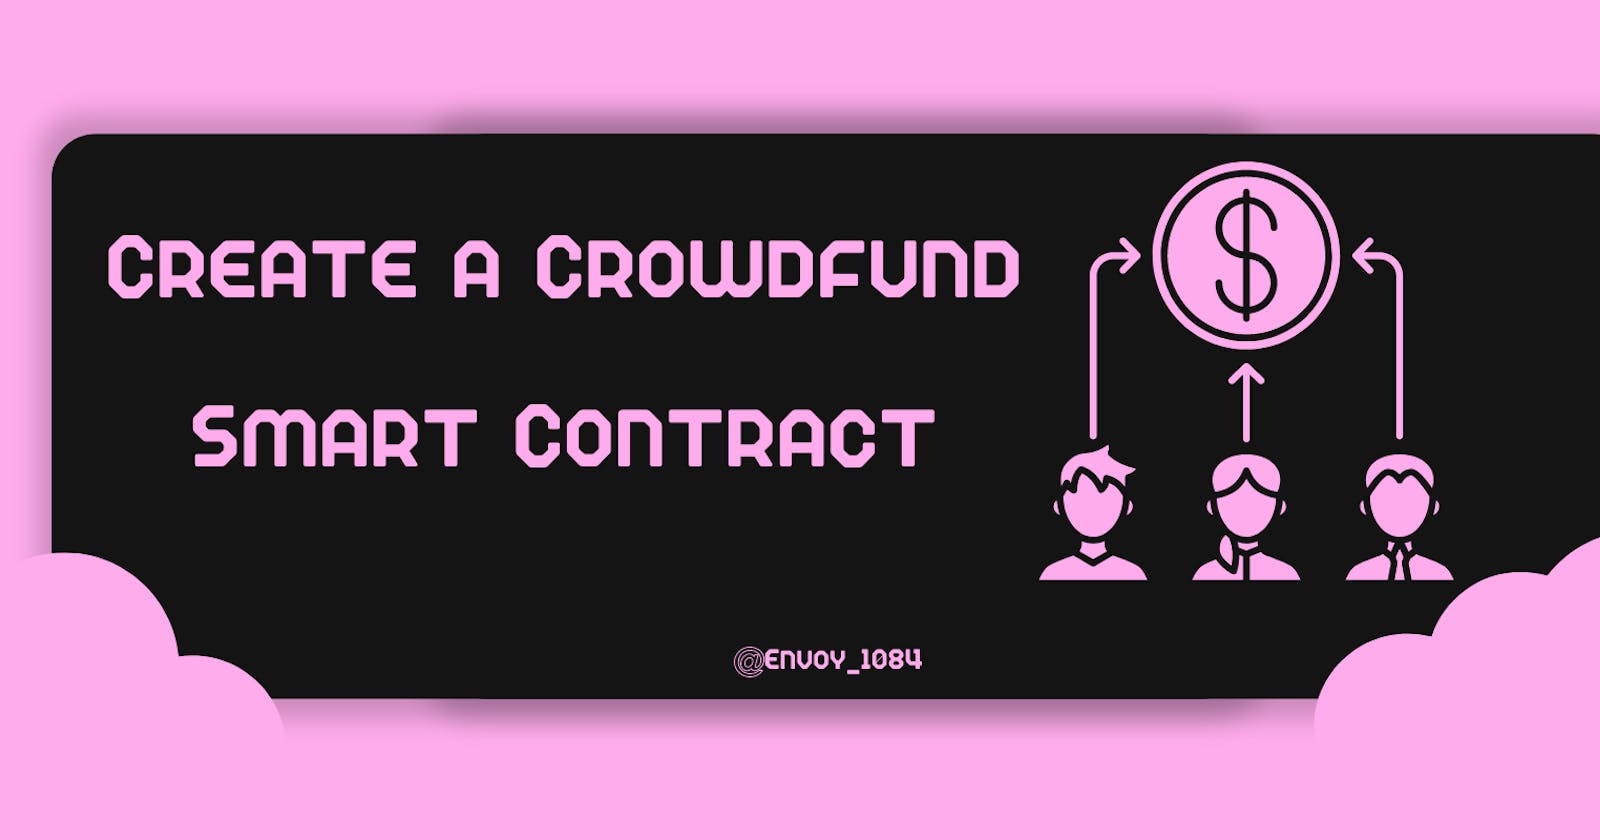 Create a Crowdfund Smart Contract using Solidity